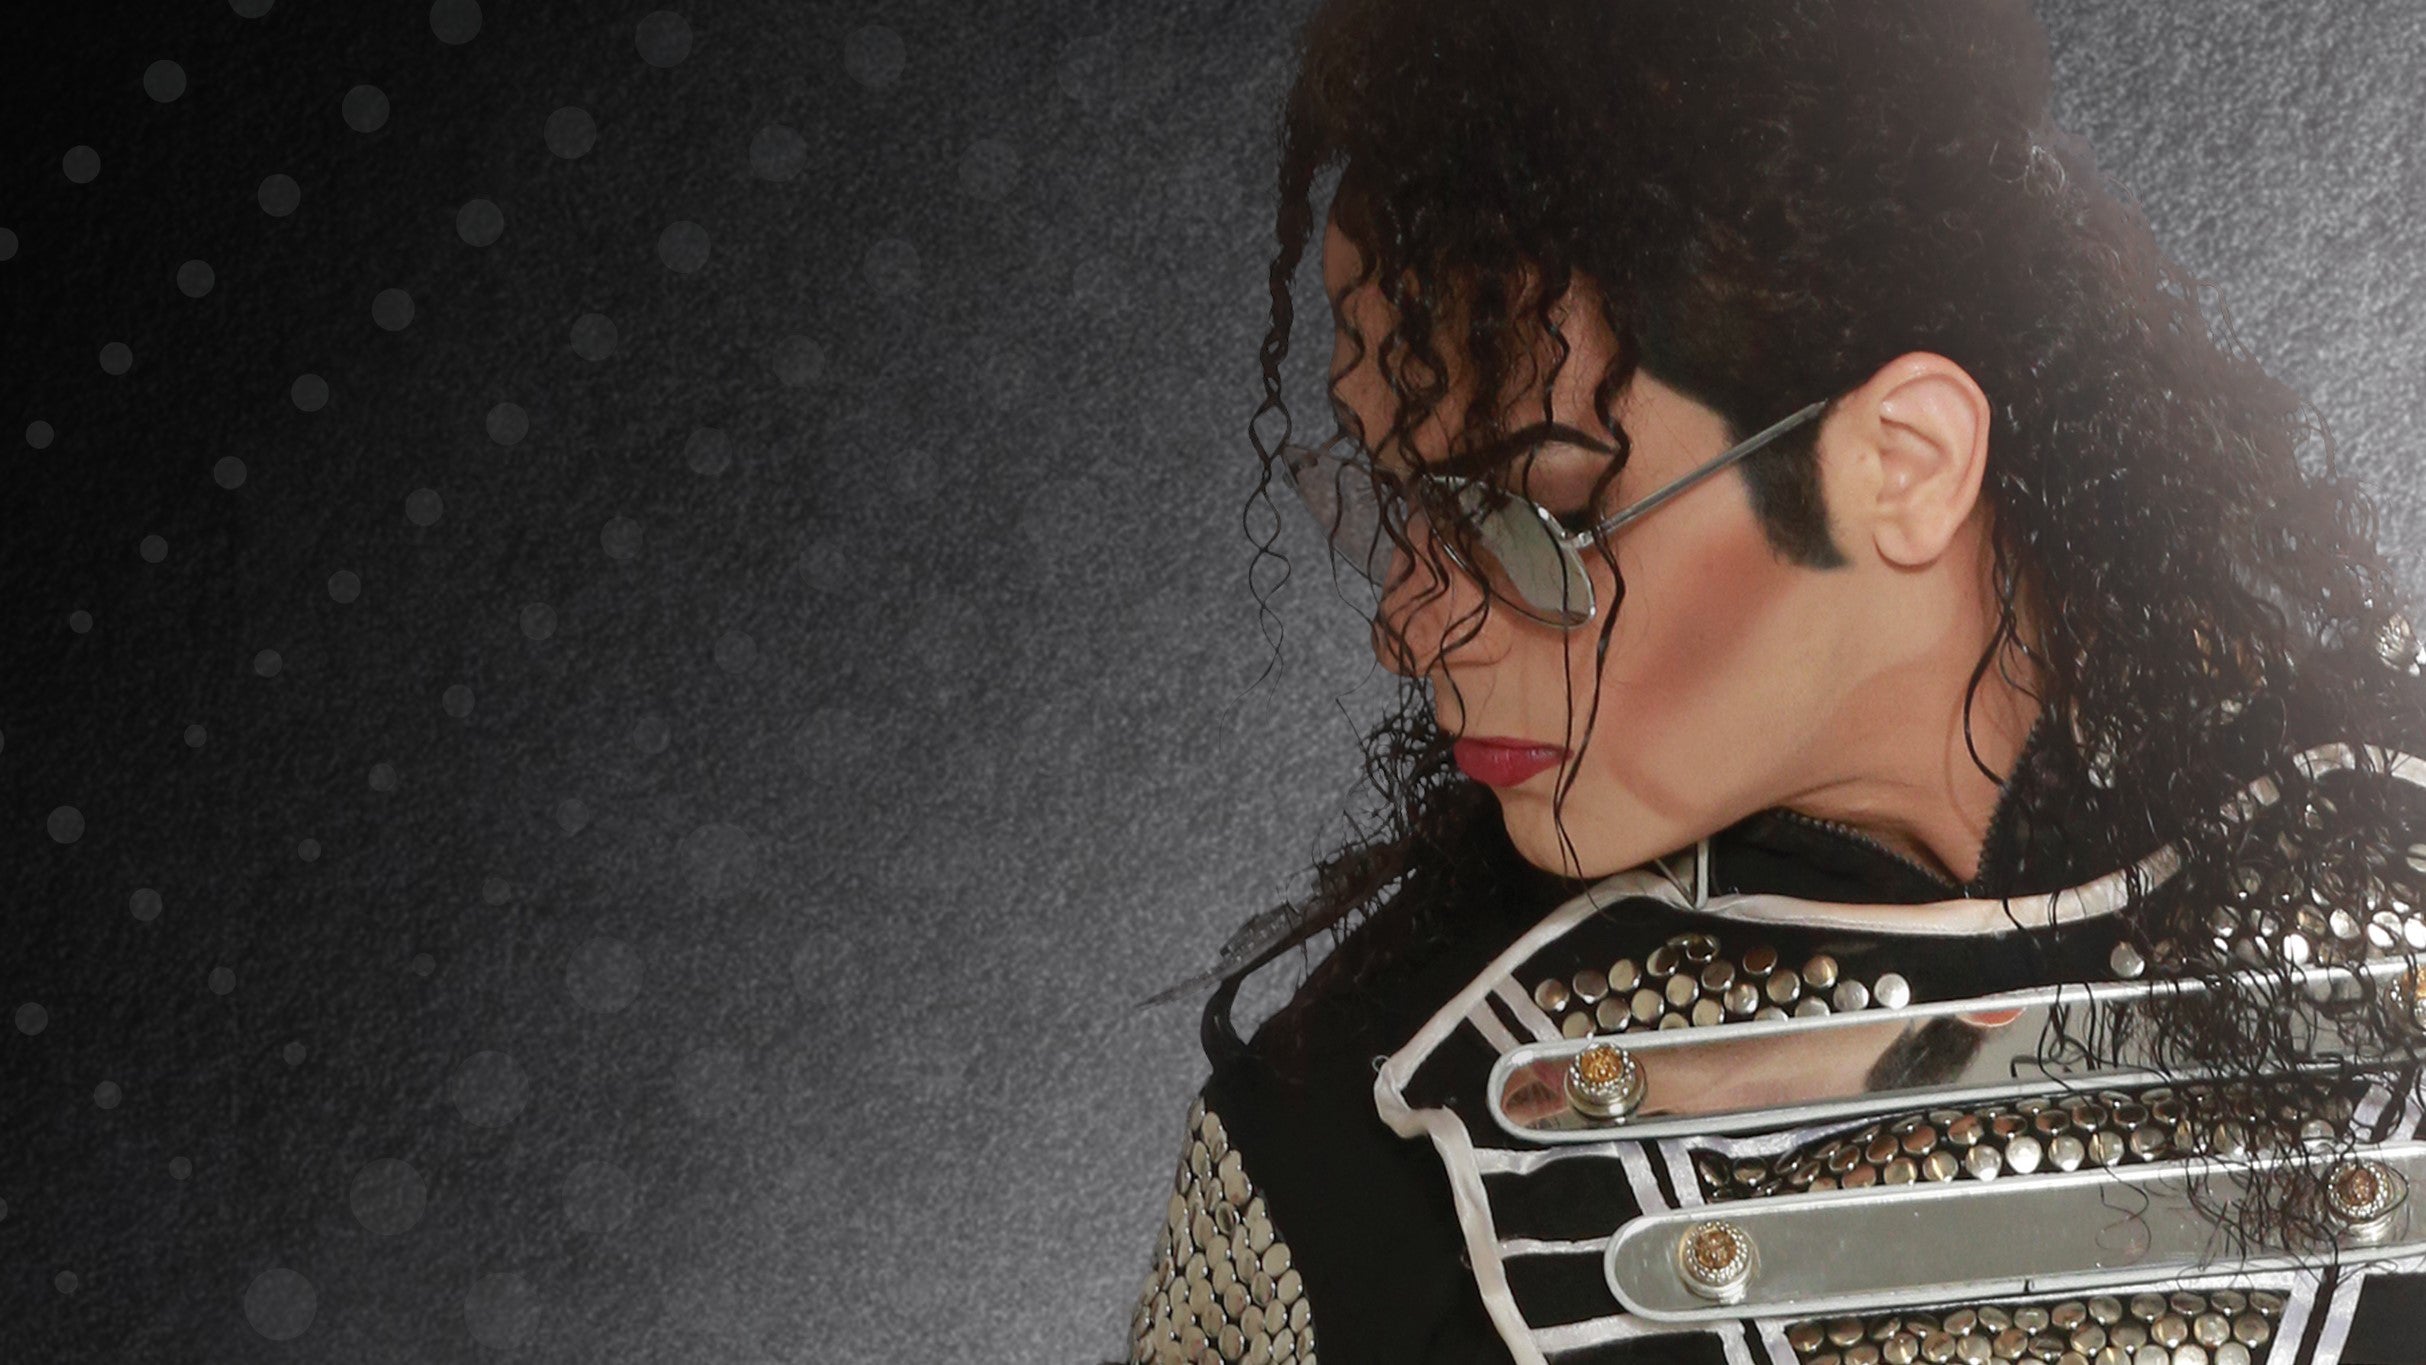 MJ LIVE - Michael Jackson Tribute in Rosemont promo photo for Discount Offer #3 presale offer code